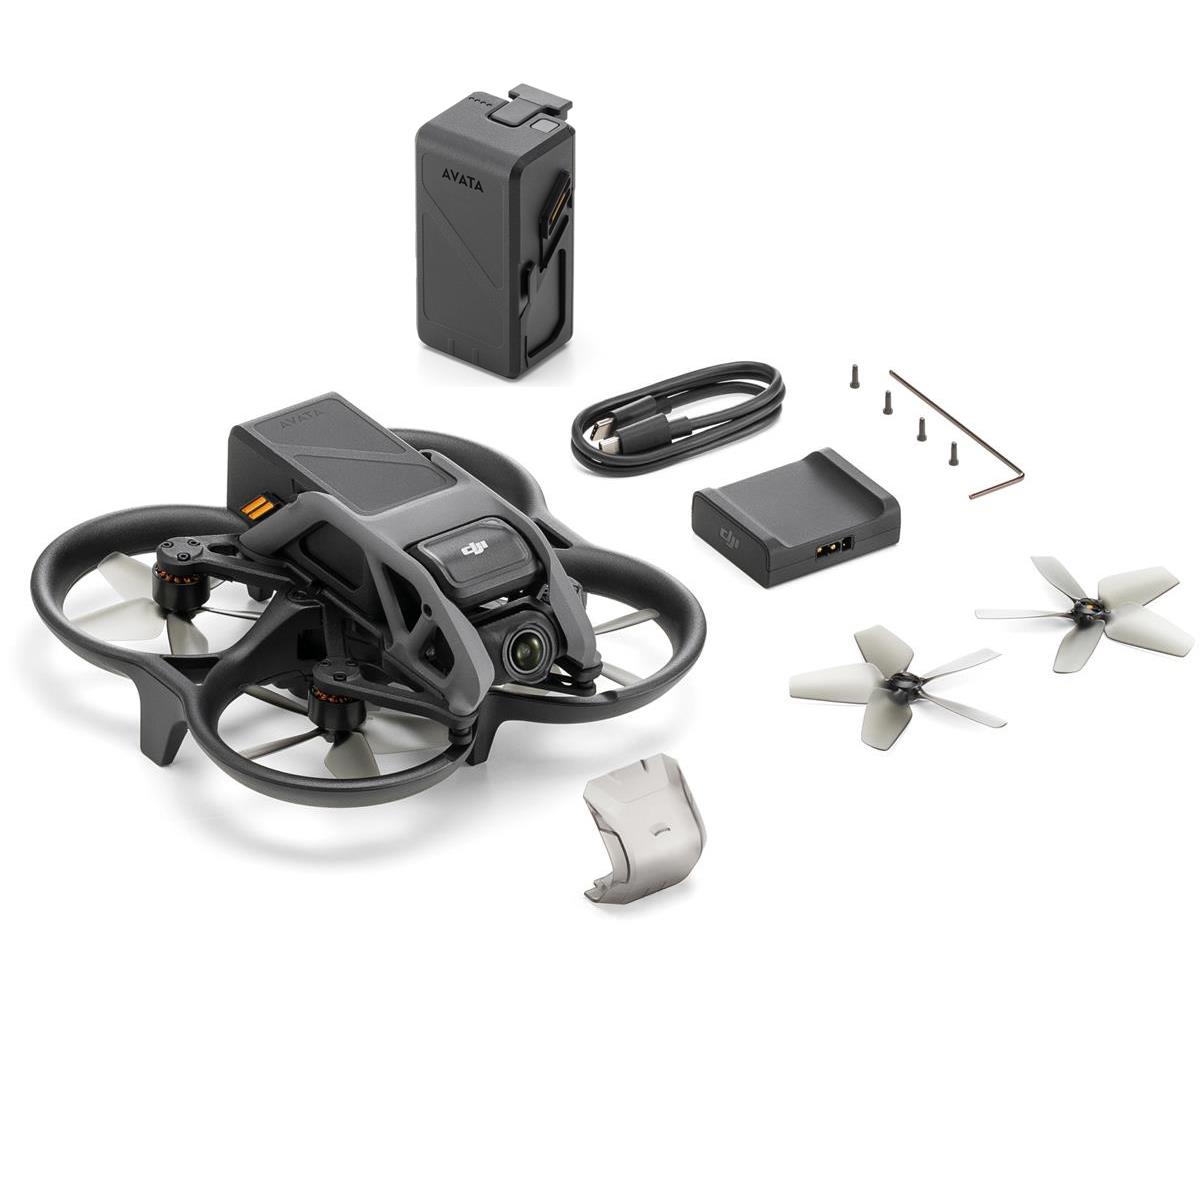 Image of DJI Avata FPV Drone with Extra Battery